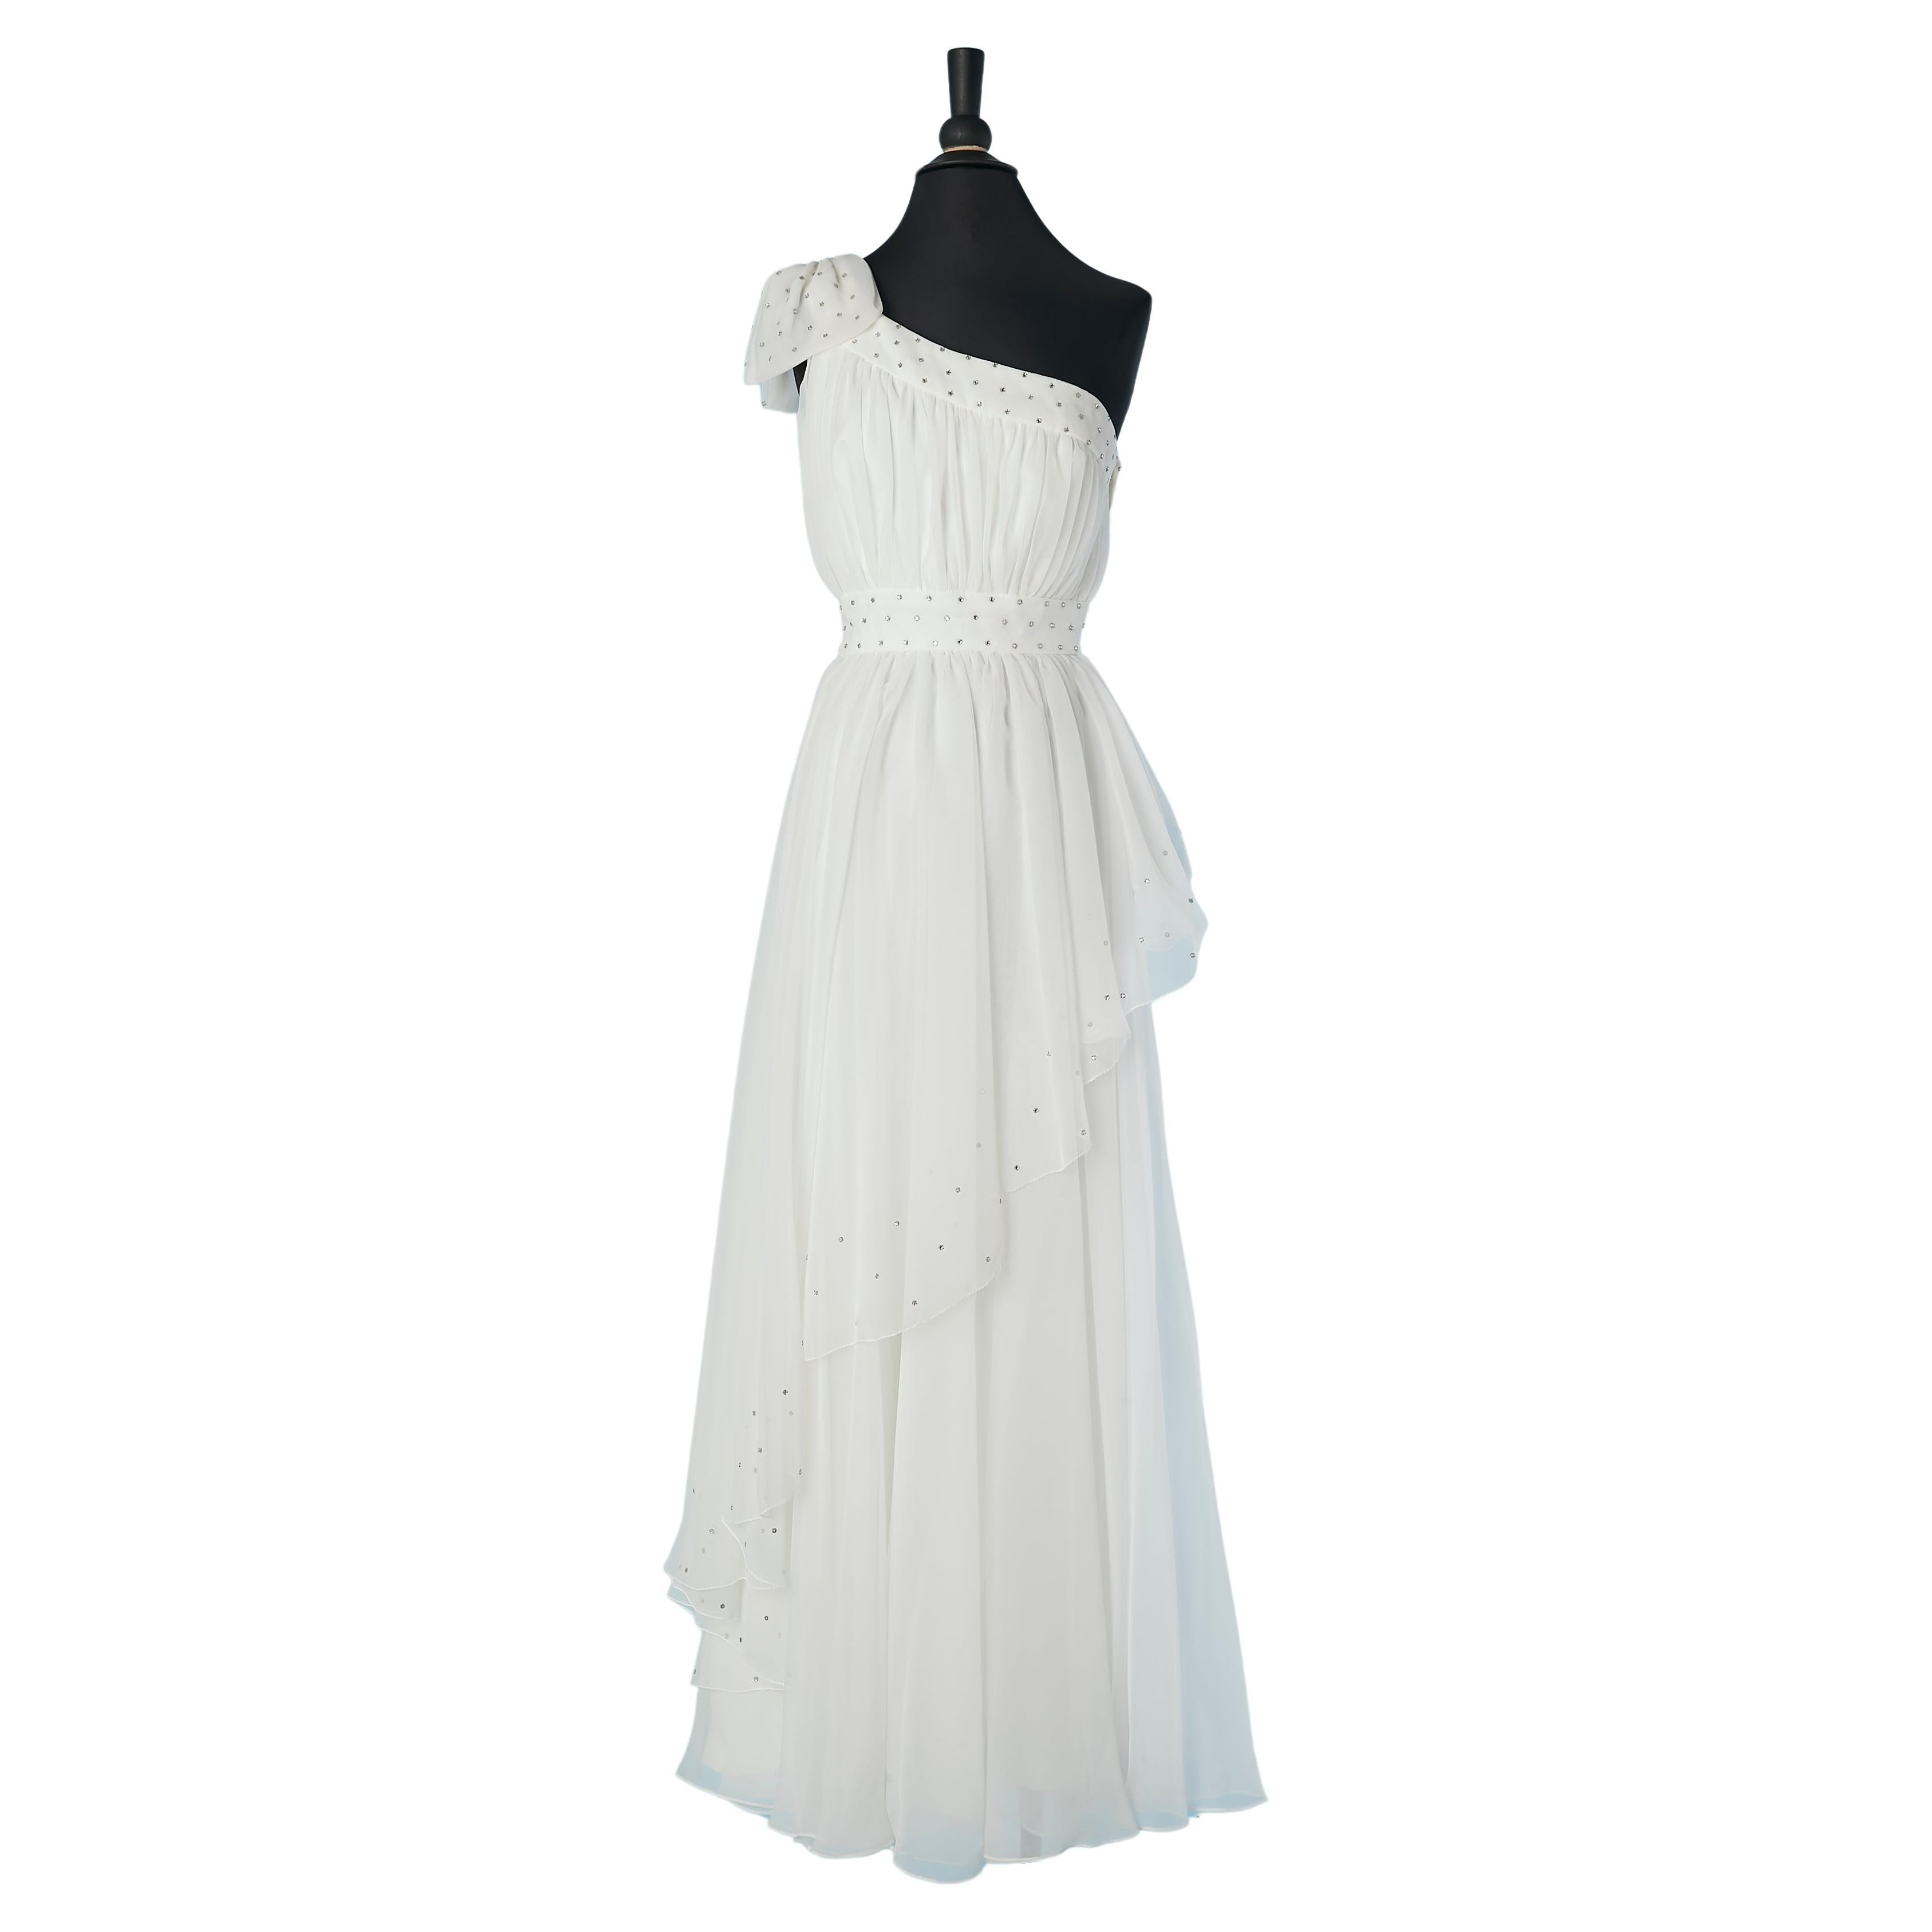 White asymmetrical evening dress with rhinestone embellishment Mike Benet Formal For Sale